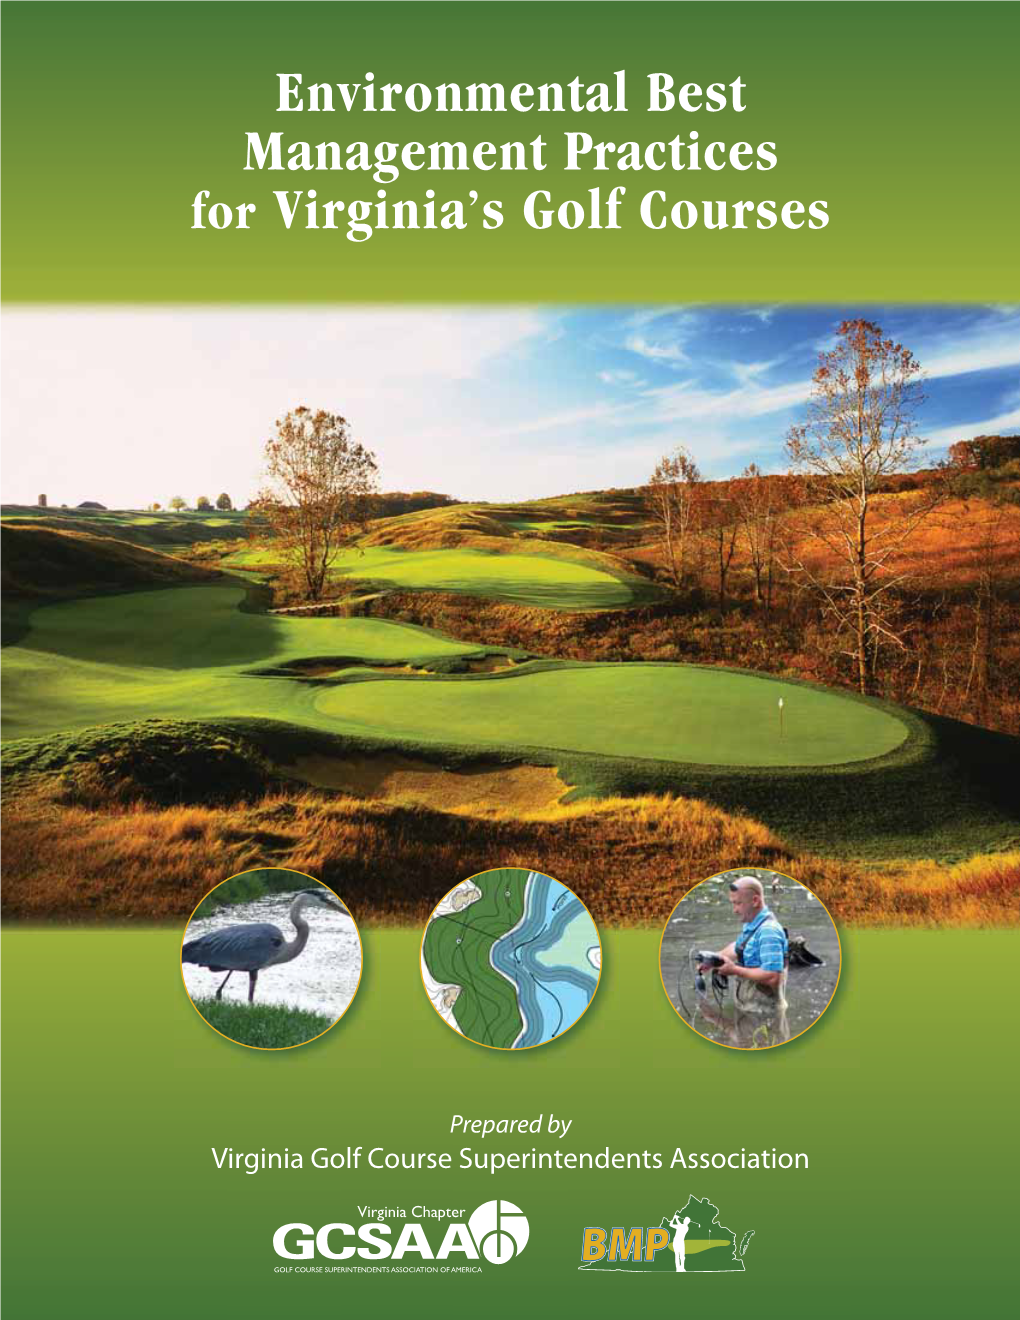 Environmental Best Management Practices for Virginia's Golf Courses